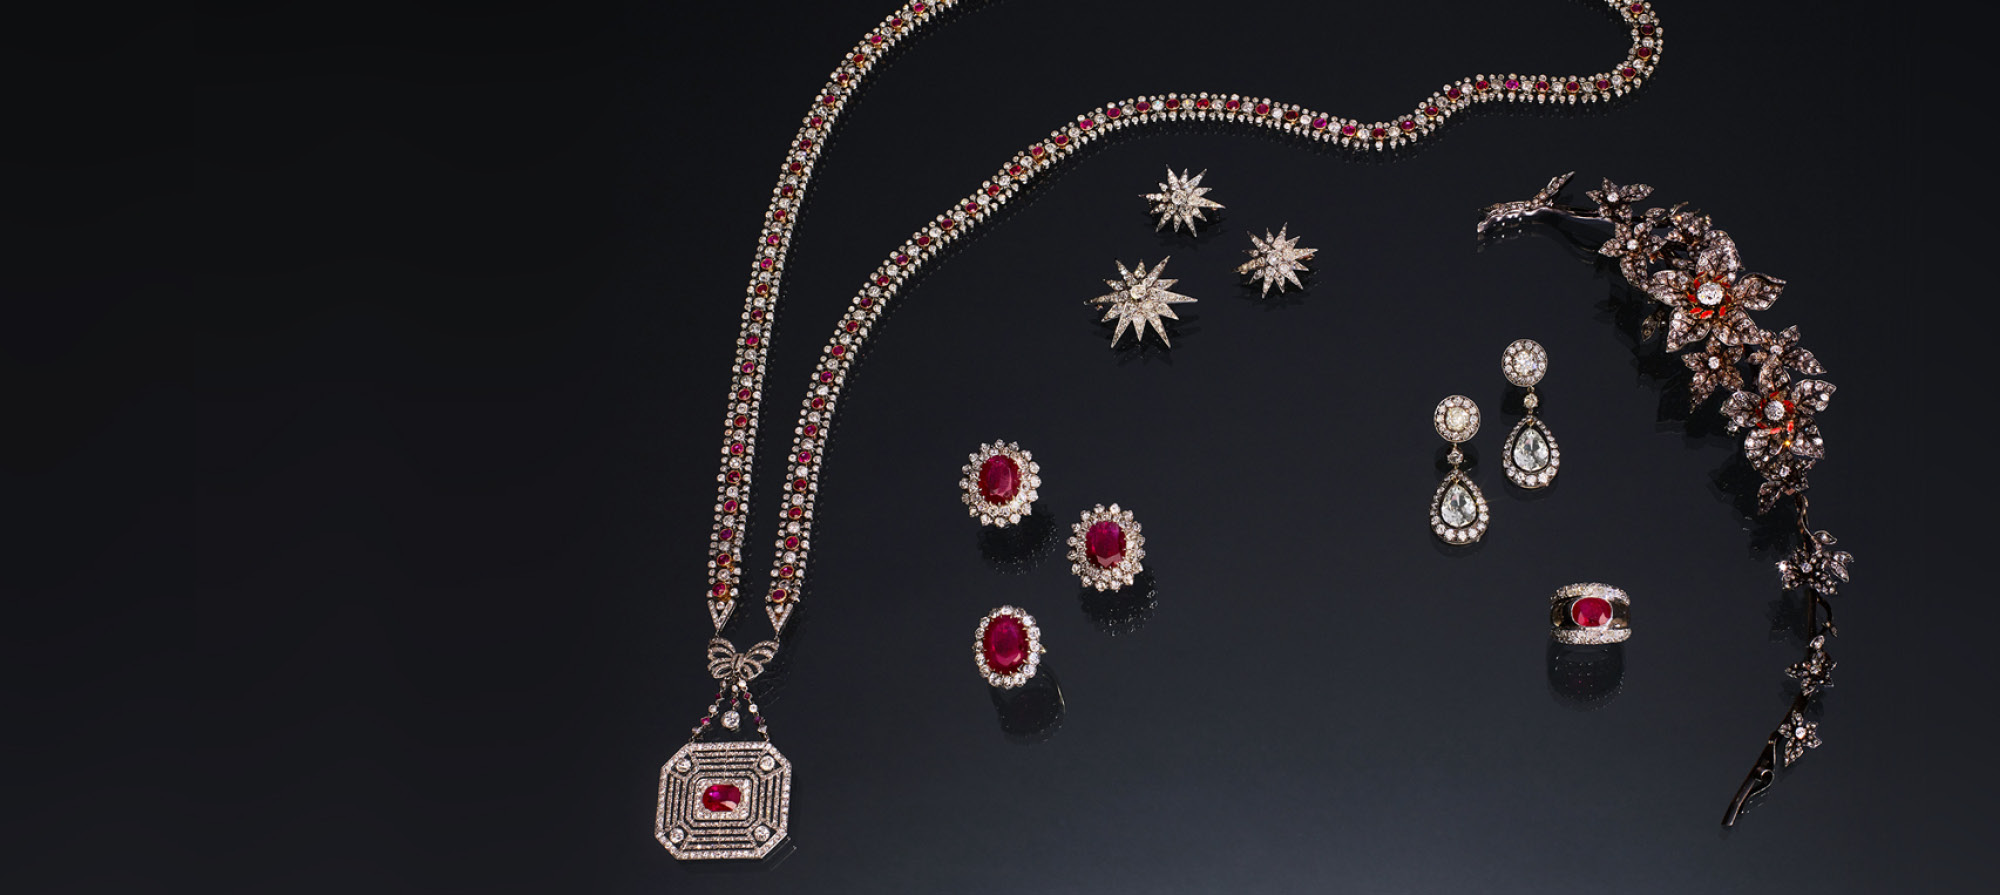 Collection of ruby jewelry items necklace, earrings, broach and rings set on black background